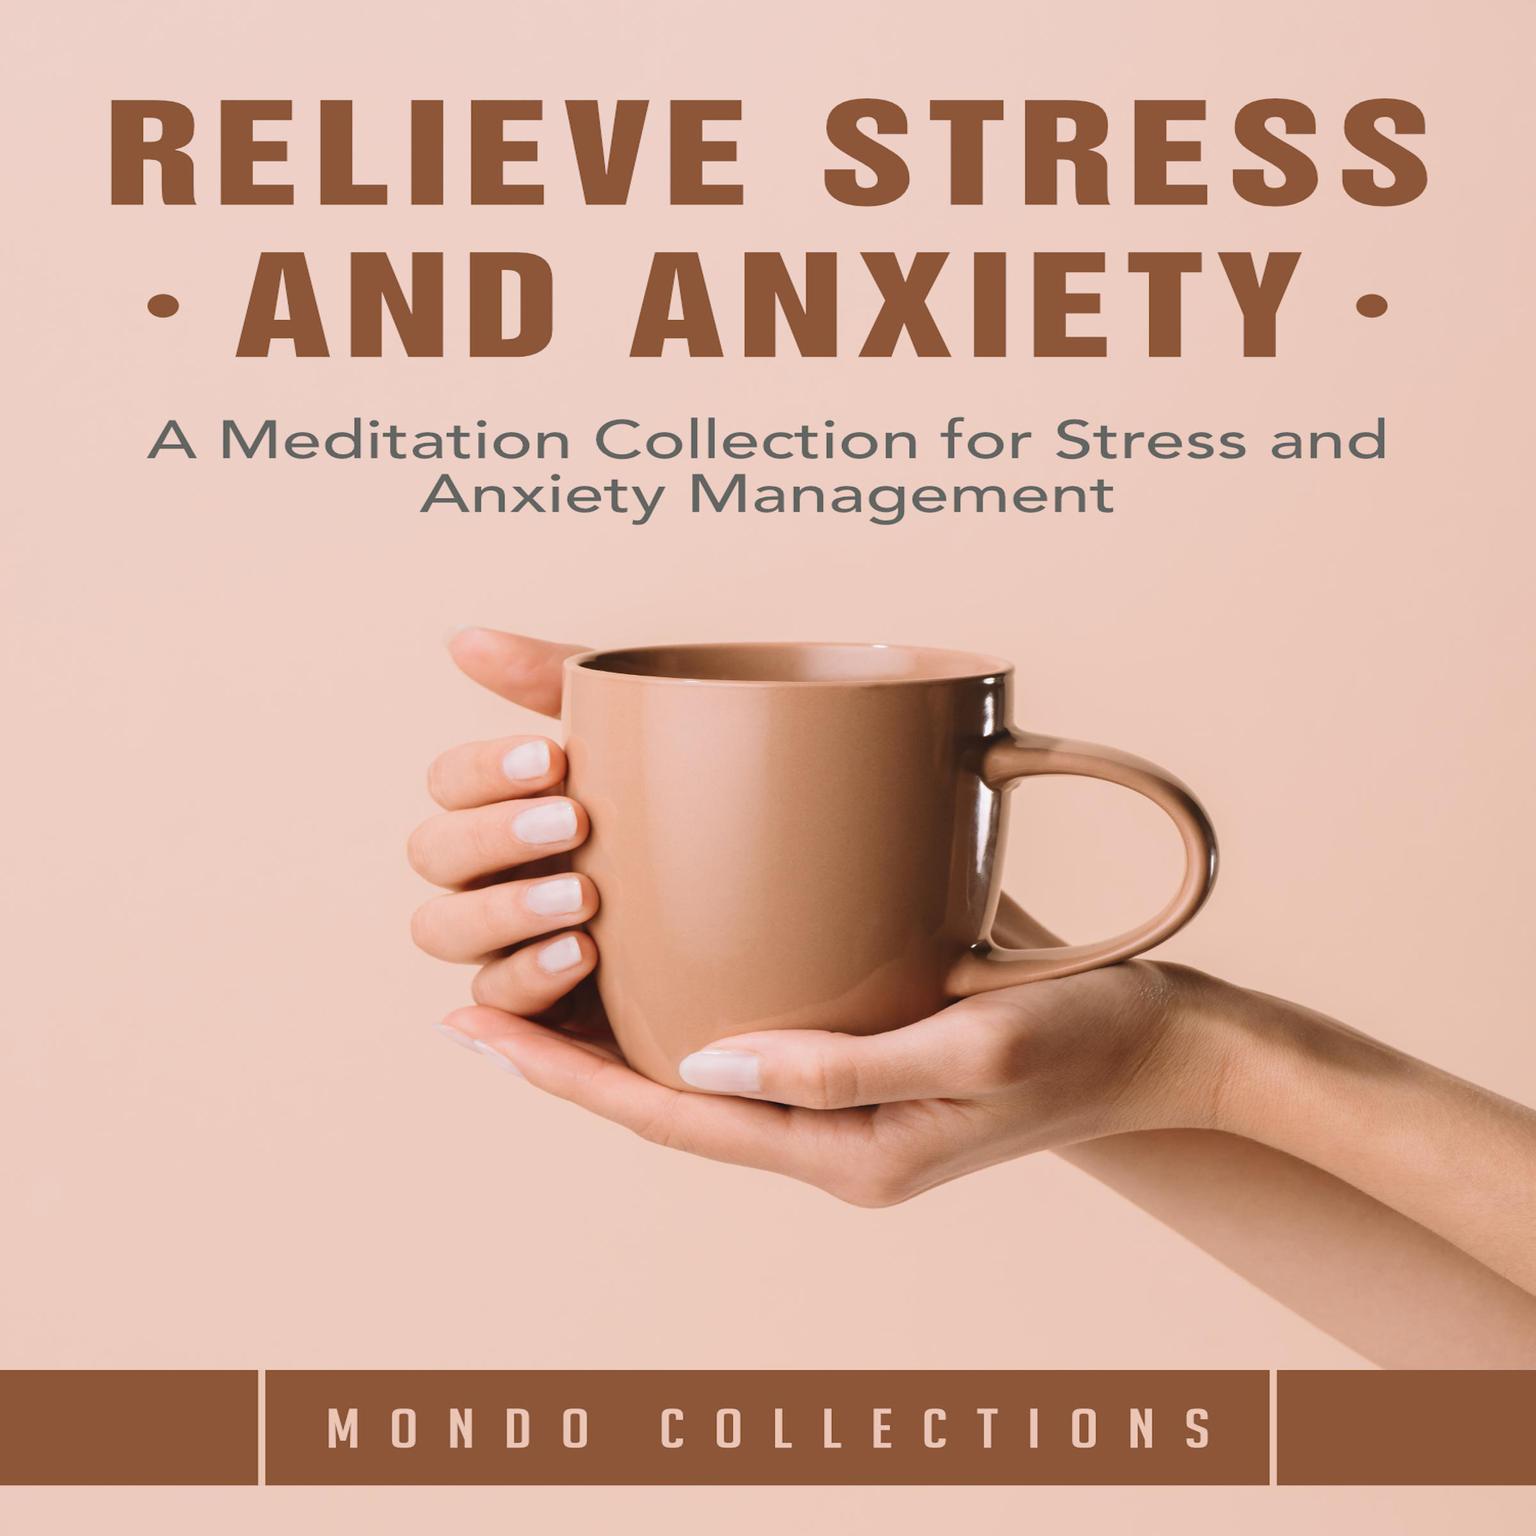 Relieve Stress and Anxiety: A Meditation Collection for Stress and Anxiety Management Audiobook, by Mondo Collections